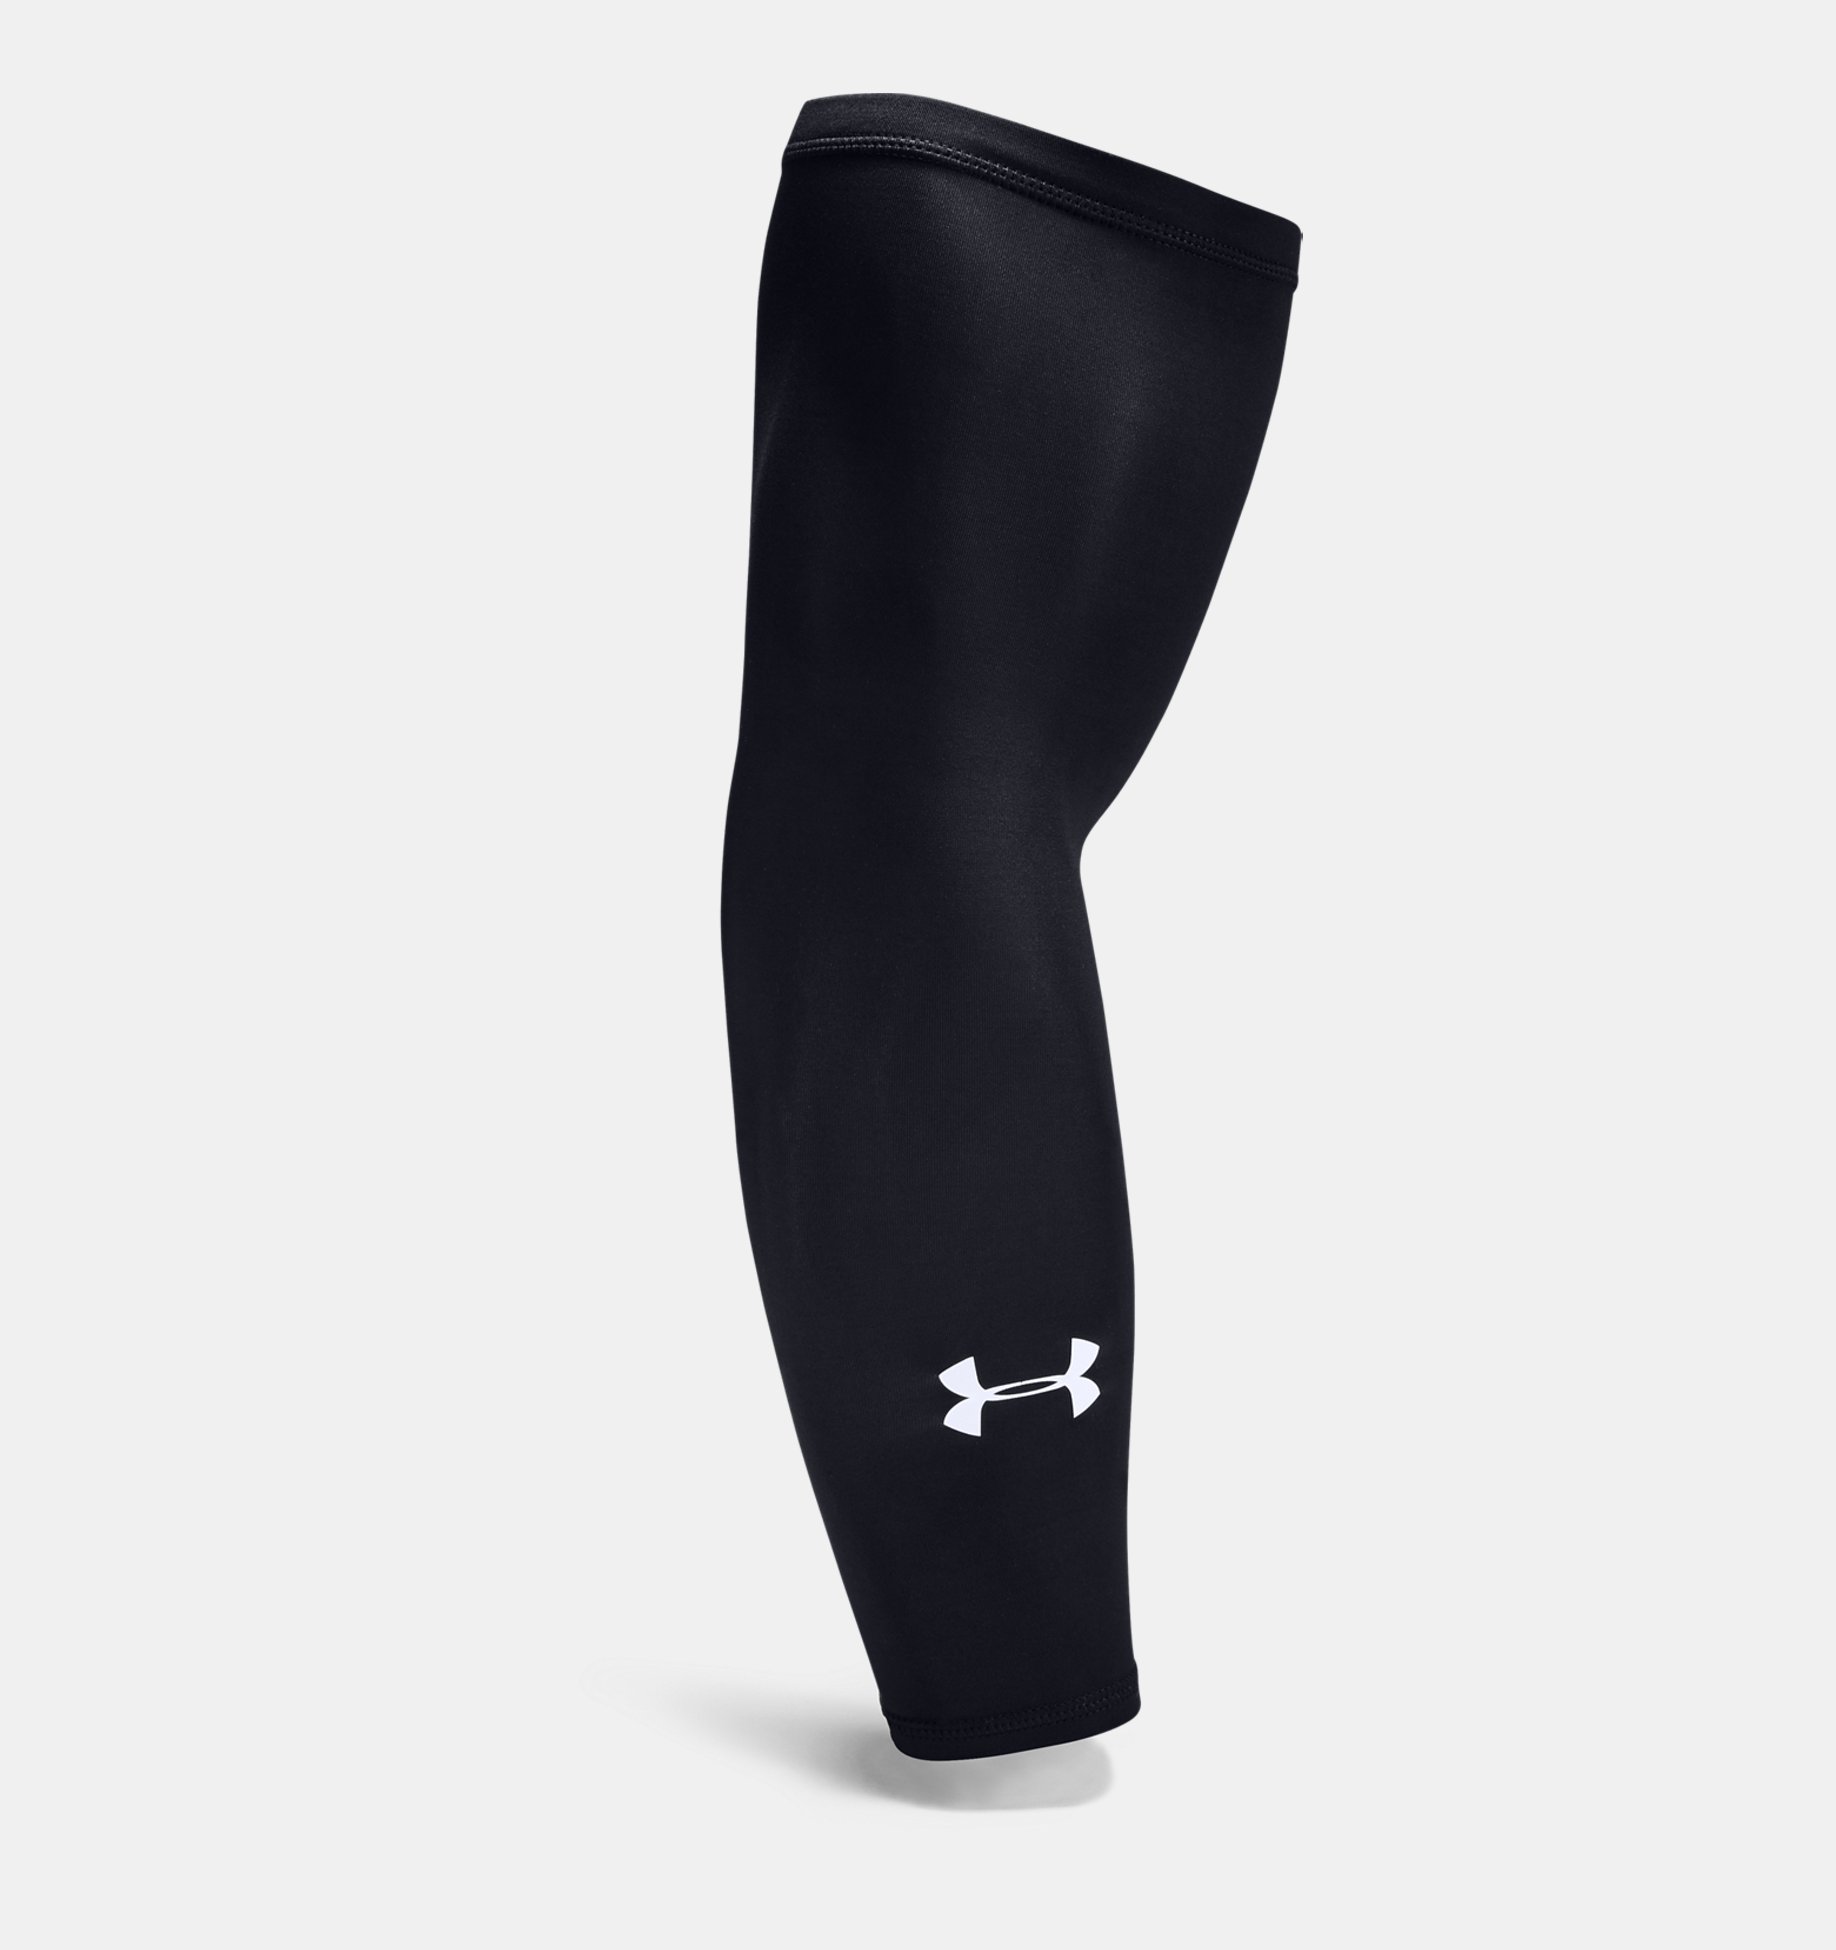 New Under Armour 2 Coolswitch Arm Sleeves Black Size L/XL 